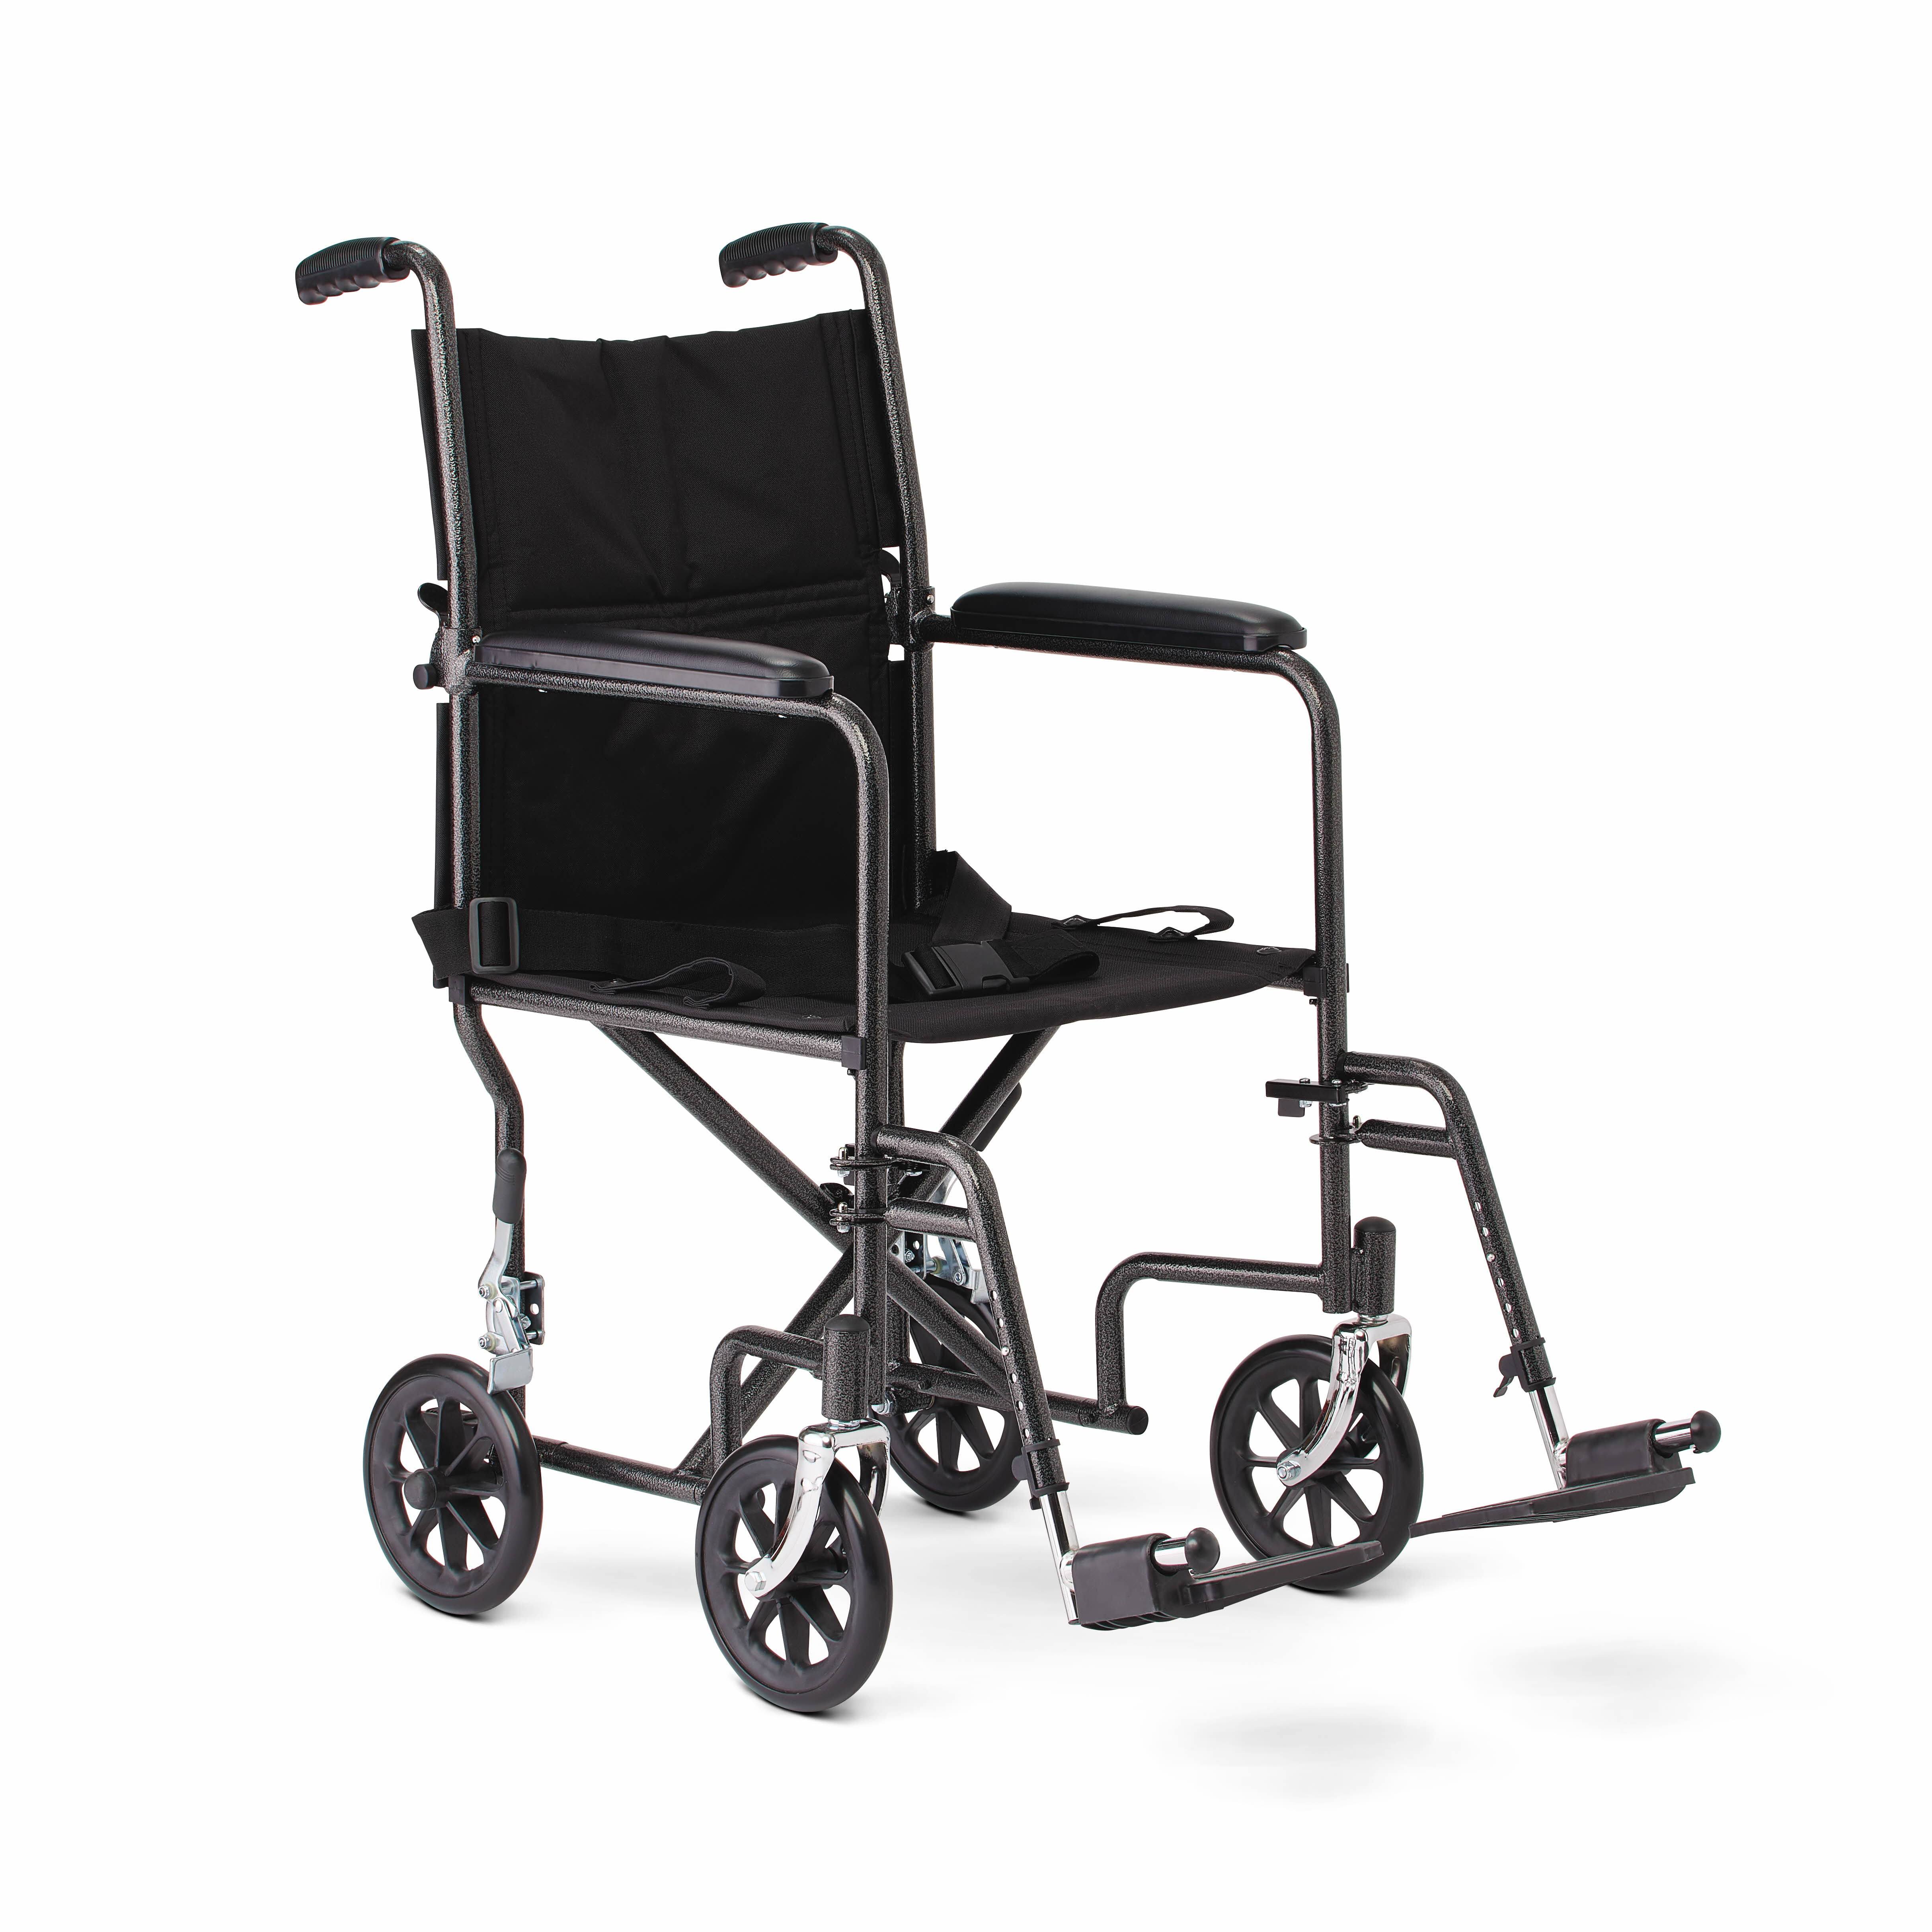 Guardian Medline Steel Transport Wheelchair, Folding Transport Chair with 8-Inch Wheels, Full Length Armrests and Swing Away Footrests, 19-inch Wide Seat